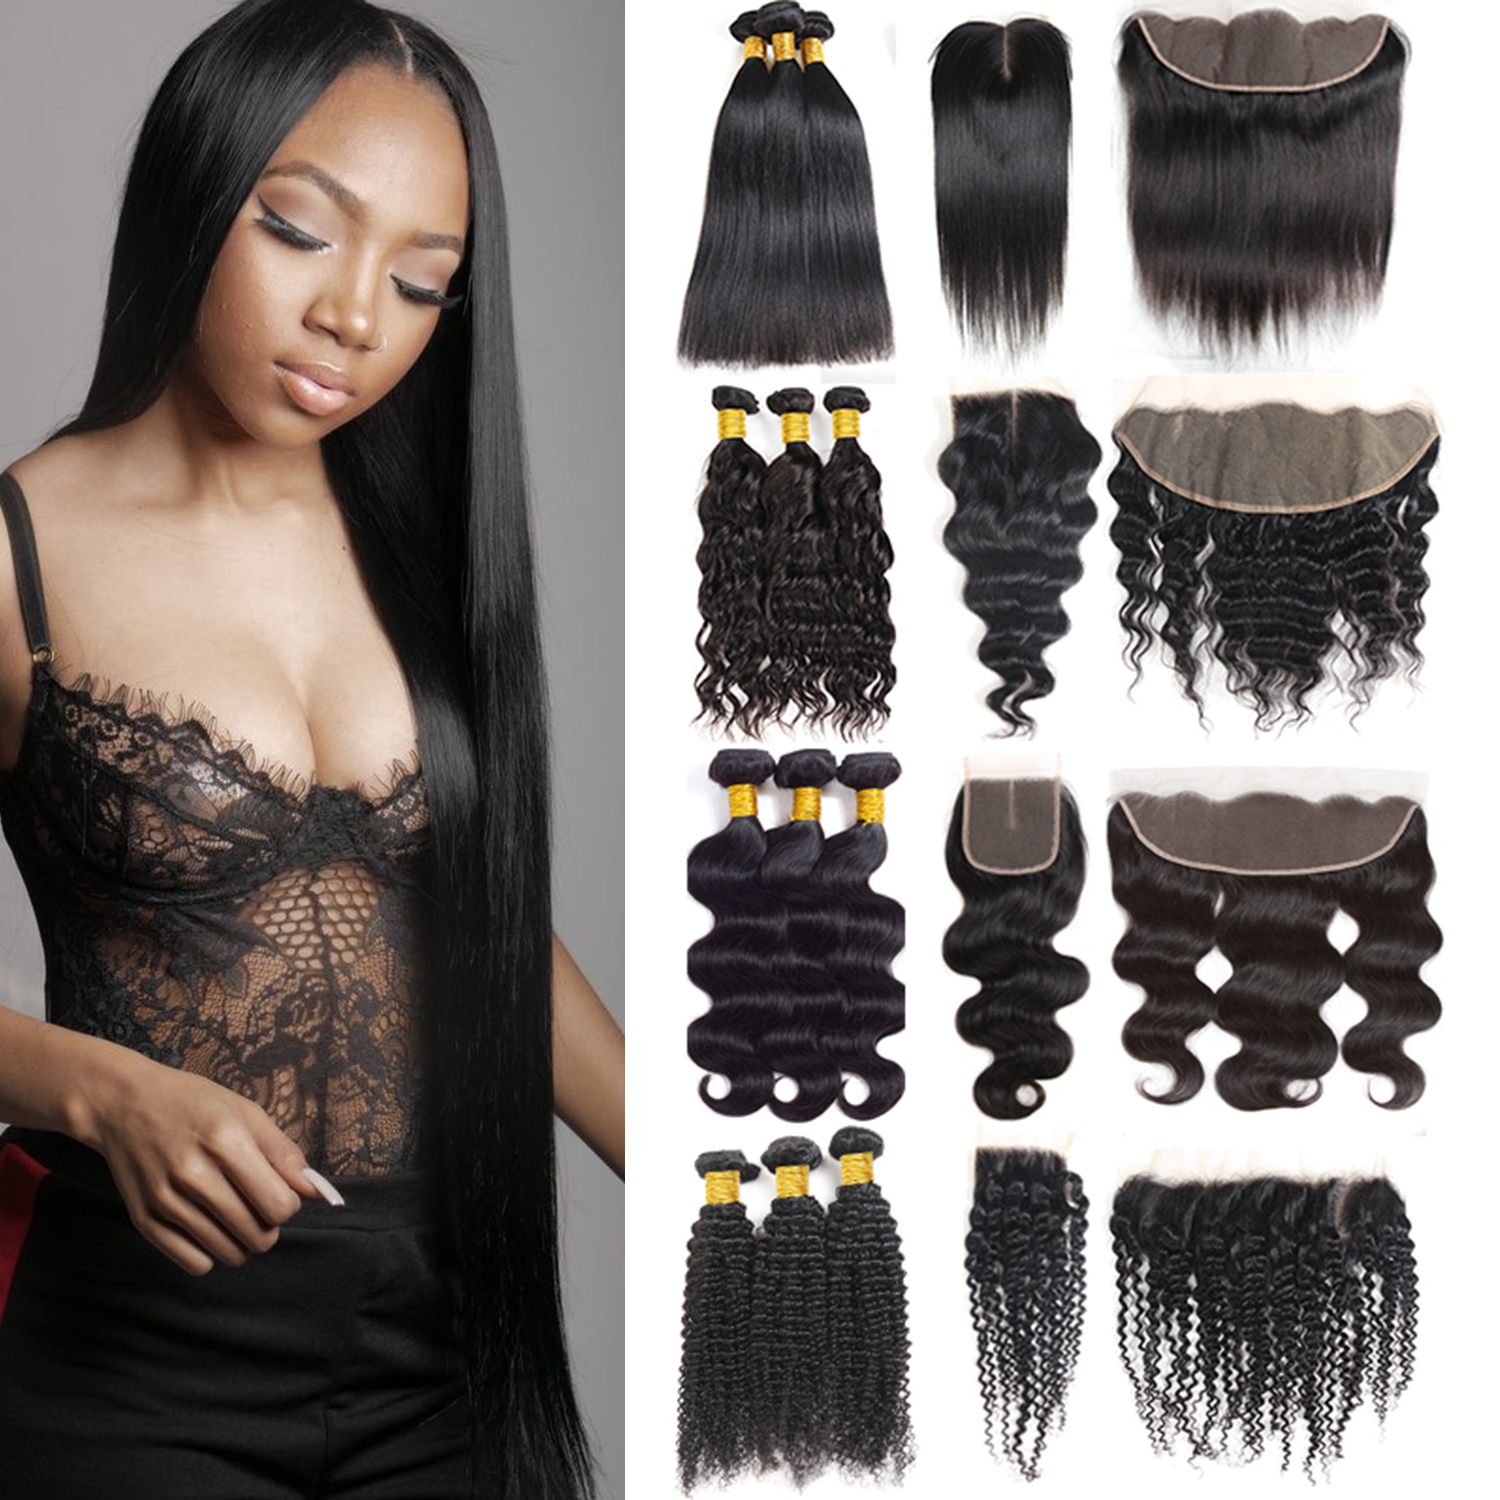 

Mink Brazilian Virgin Deep Wave Hair Bundles with Closure Unprocessed Straight Water Body Kinky Curly Human Hair Bundles with Lace Frontal